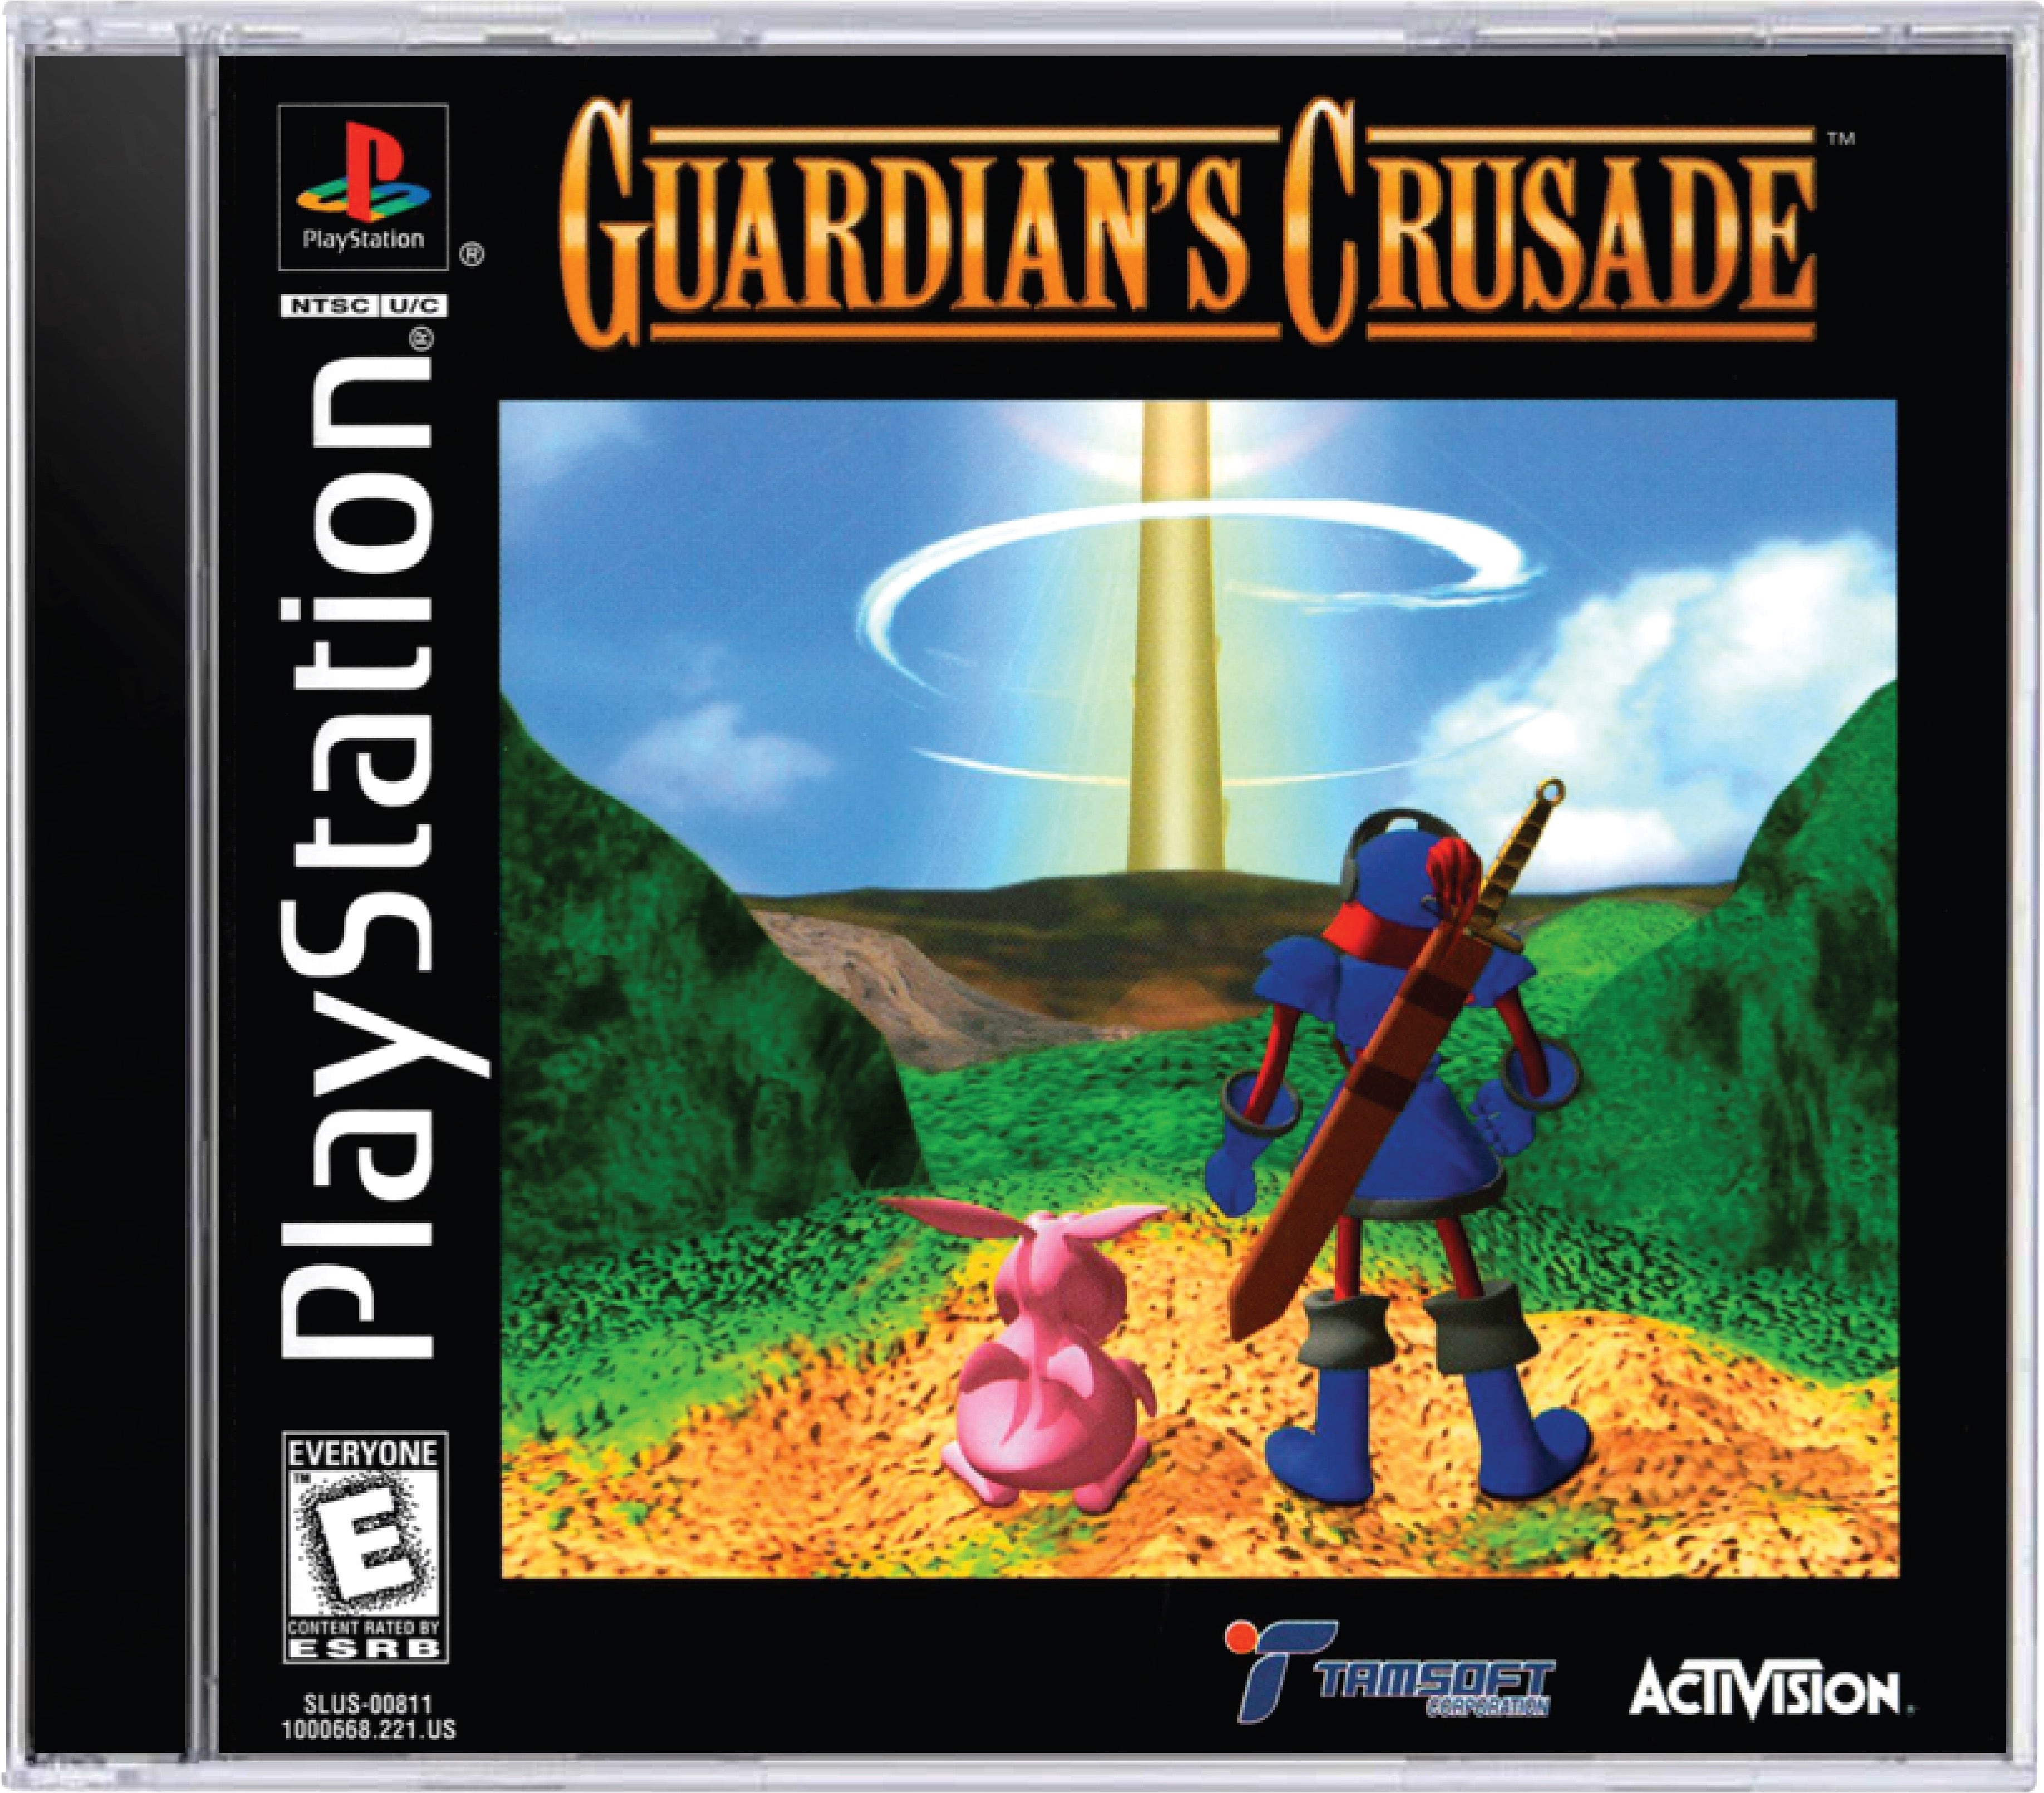 Guardian's Crusade Cover Art and Product Photo